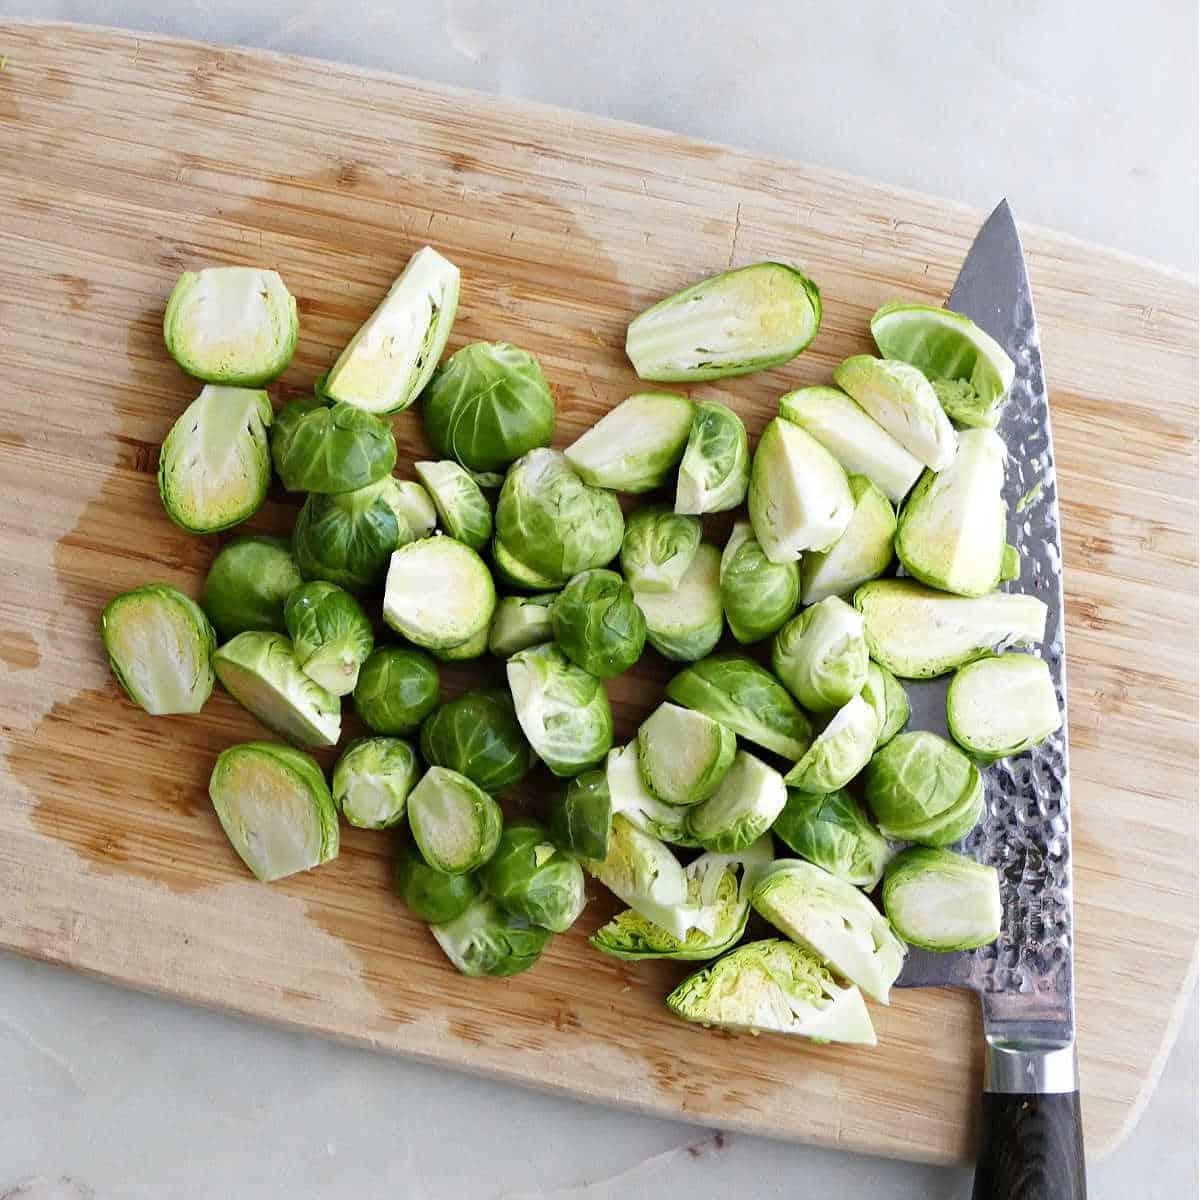 Brussels sprouts being sliced in half on a cutting board